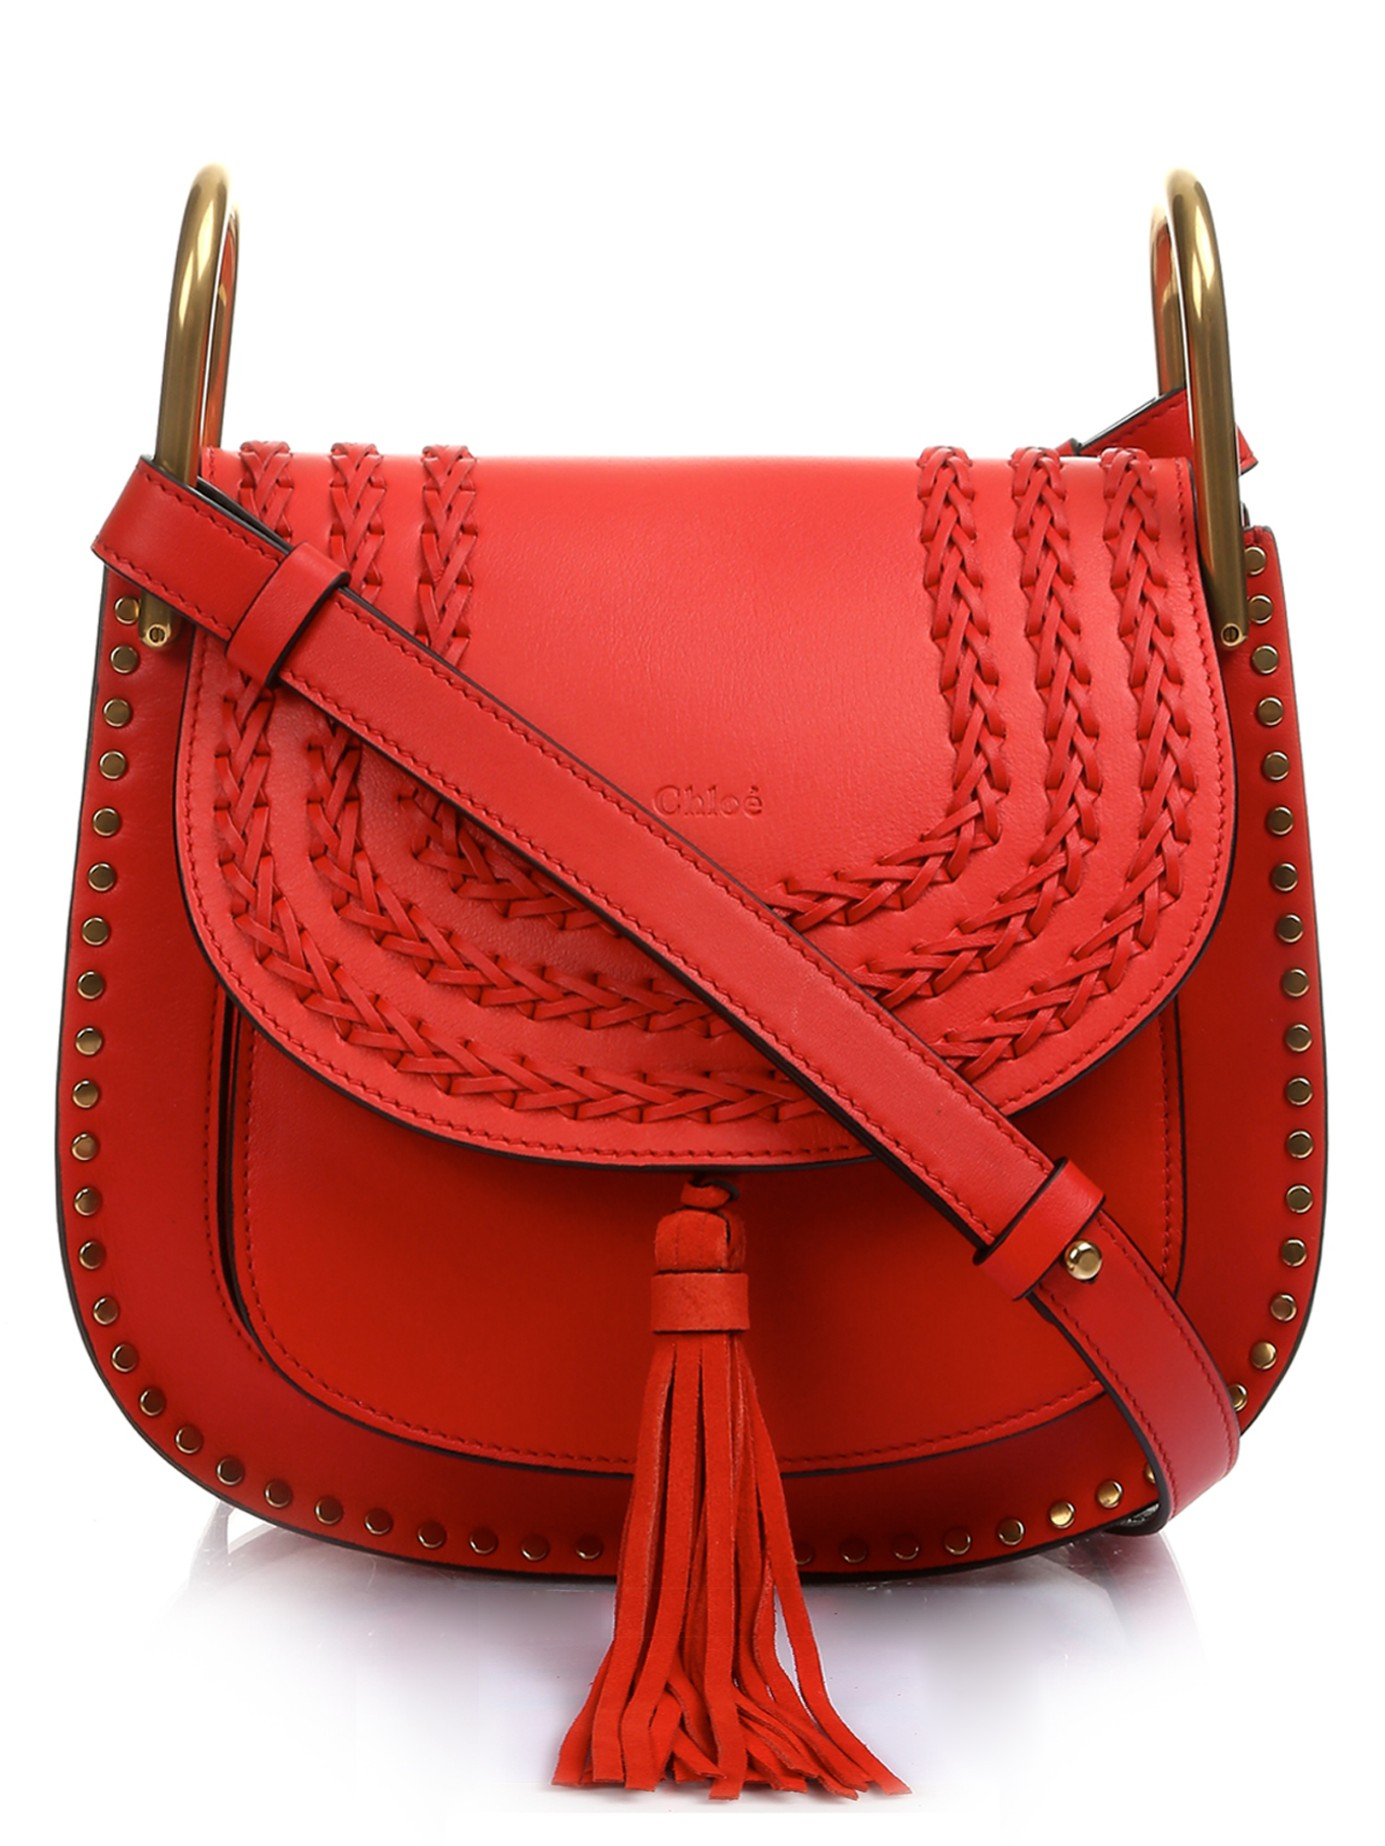 Chloé Hudson Small Leather Cross-Body Bag in Red - Lyst